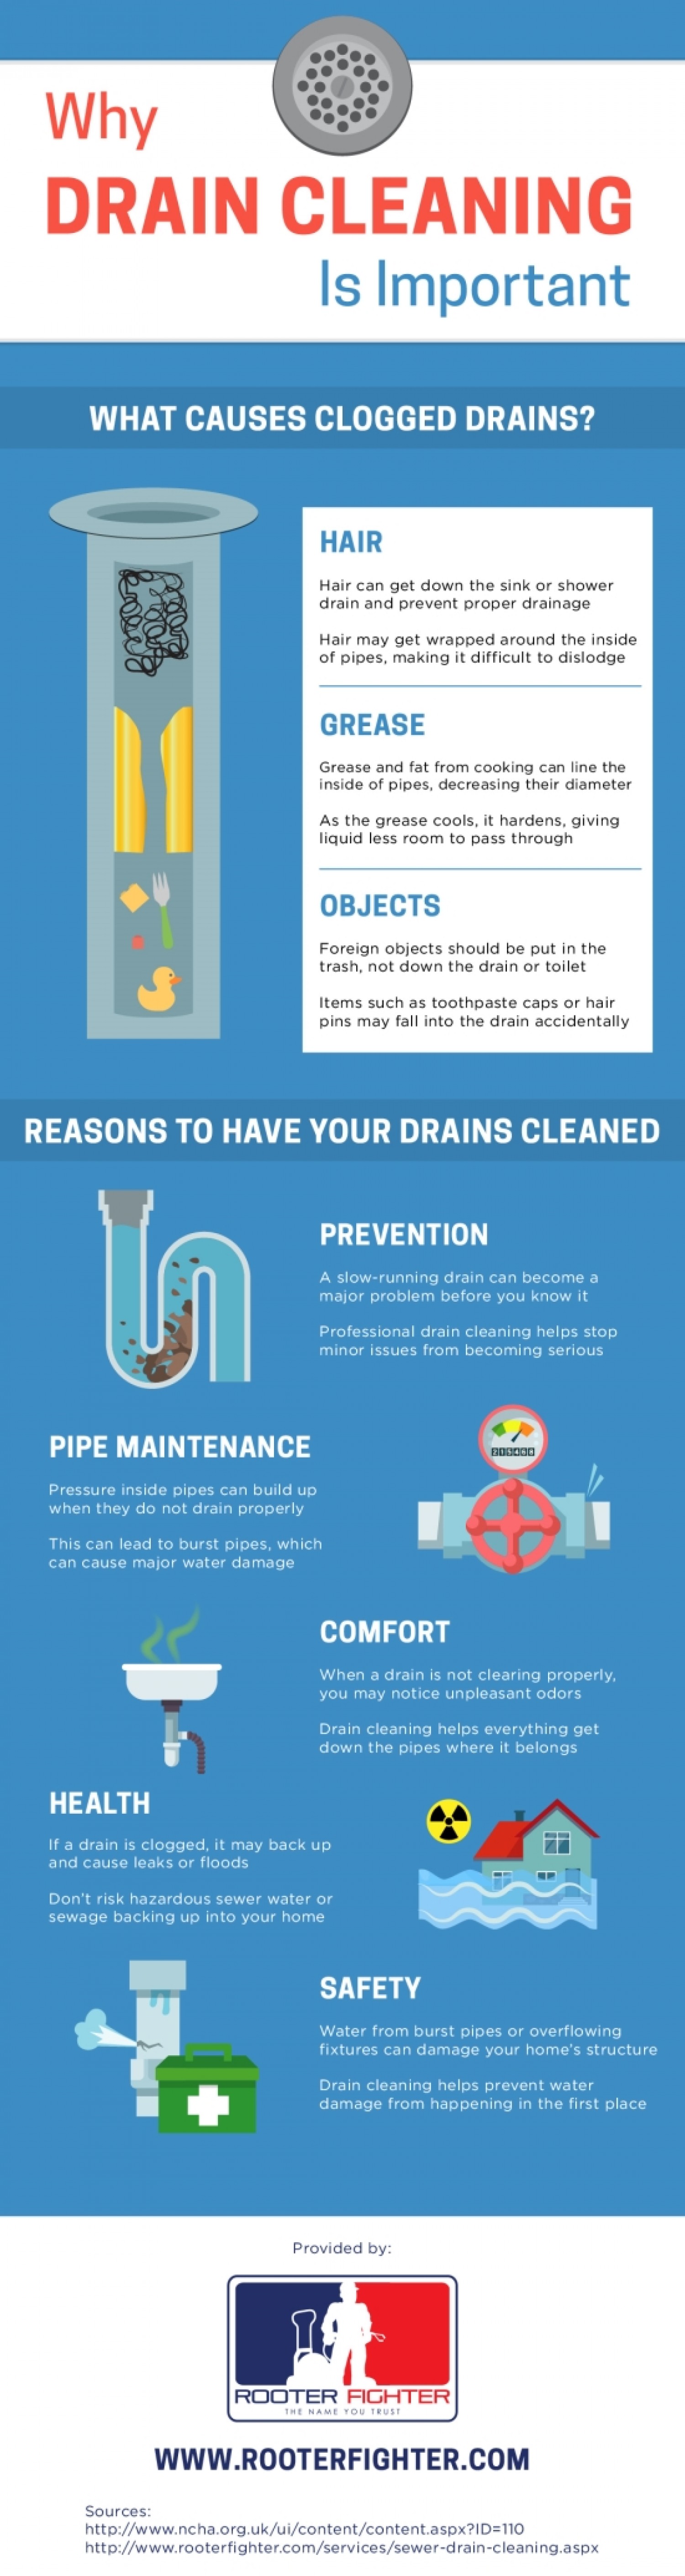 drain-cleaning-is-important